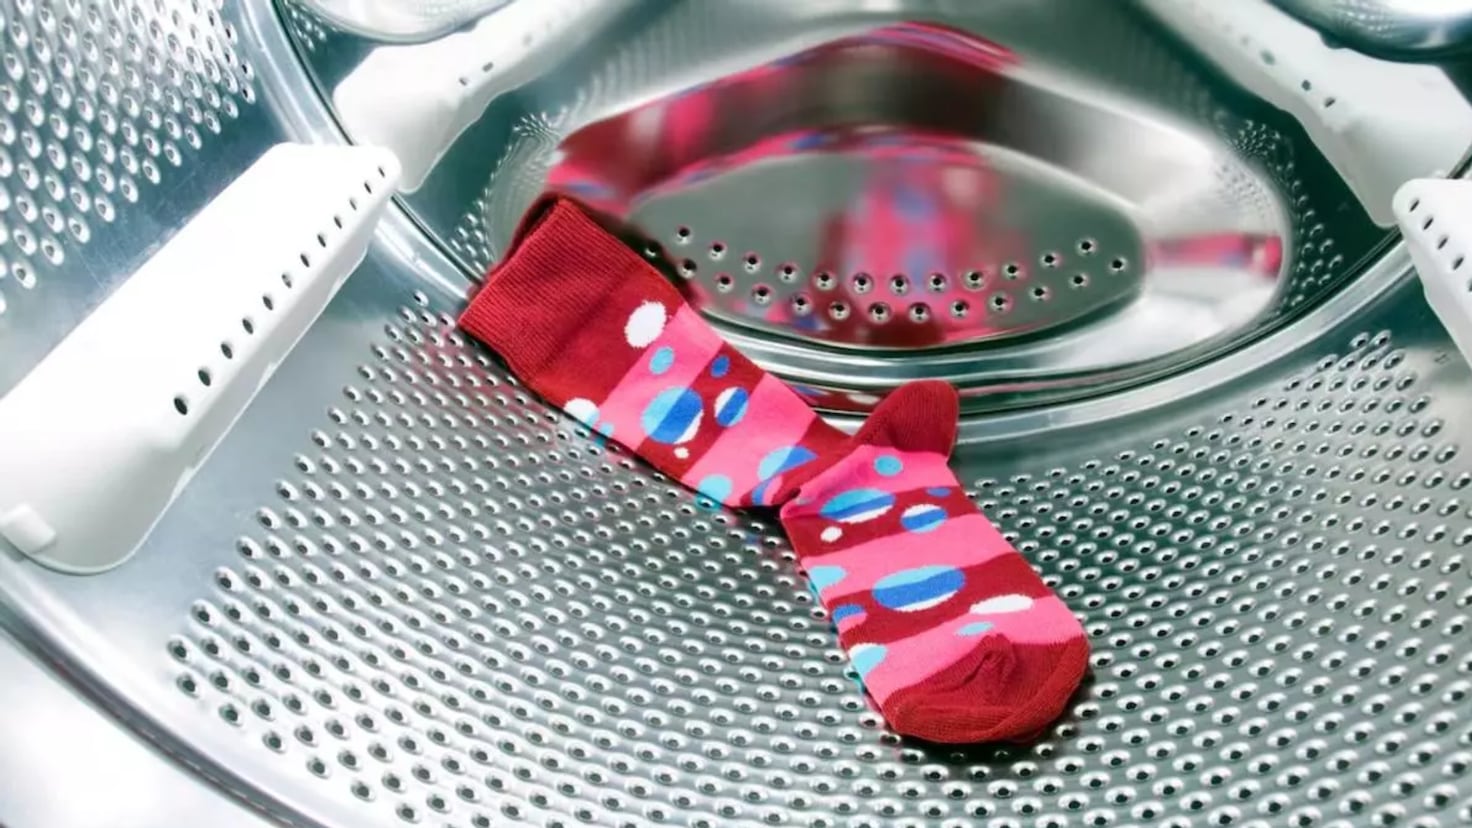 Study explains why socks disappear in the washing machine
